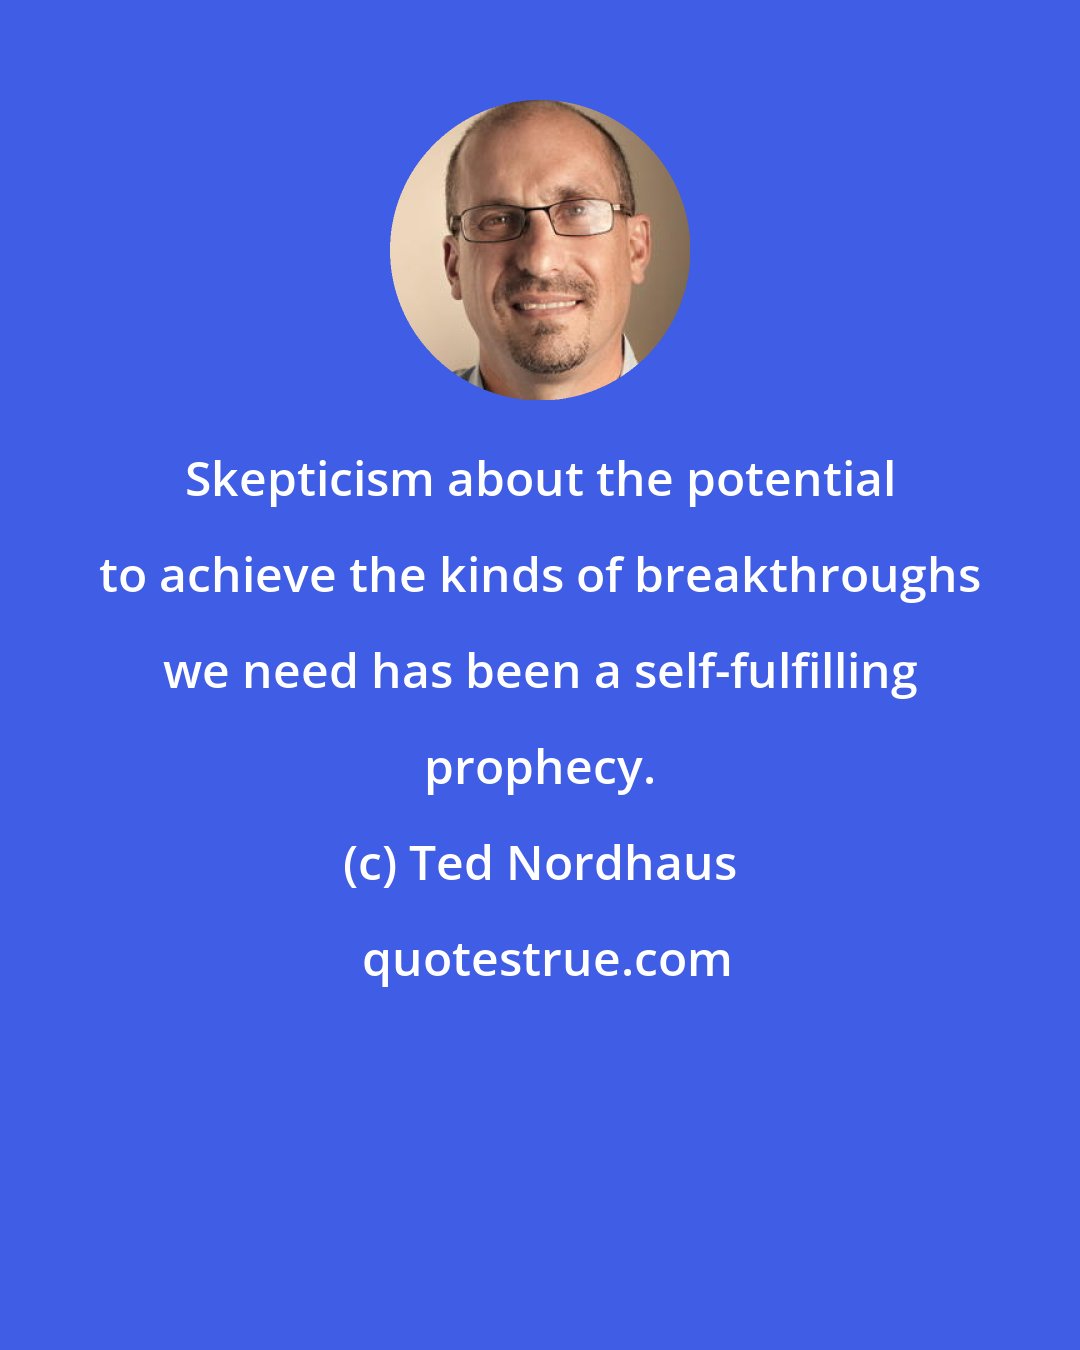 Ted Nordhaus: Skepticism about the potential to achieve the kinds of breakthroughs we need has been a self-fulfilling prophecy.